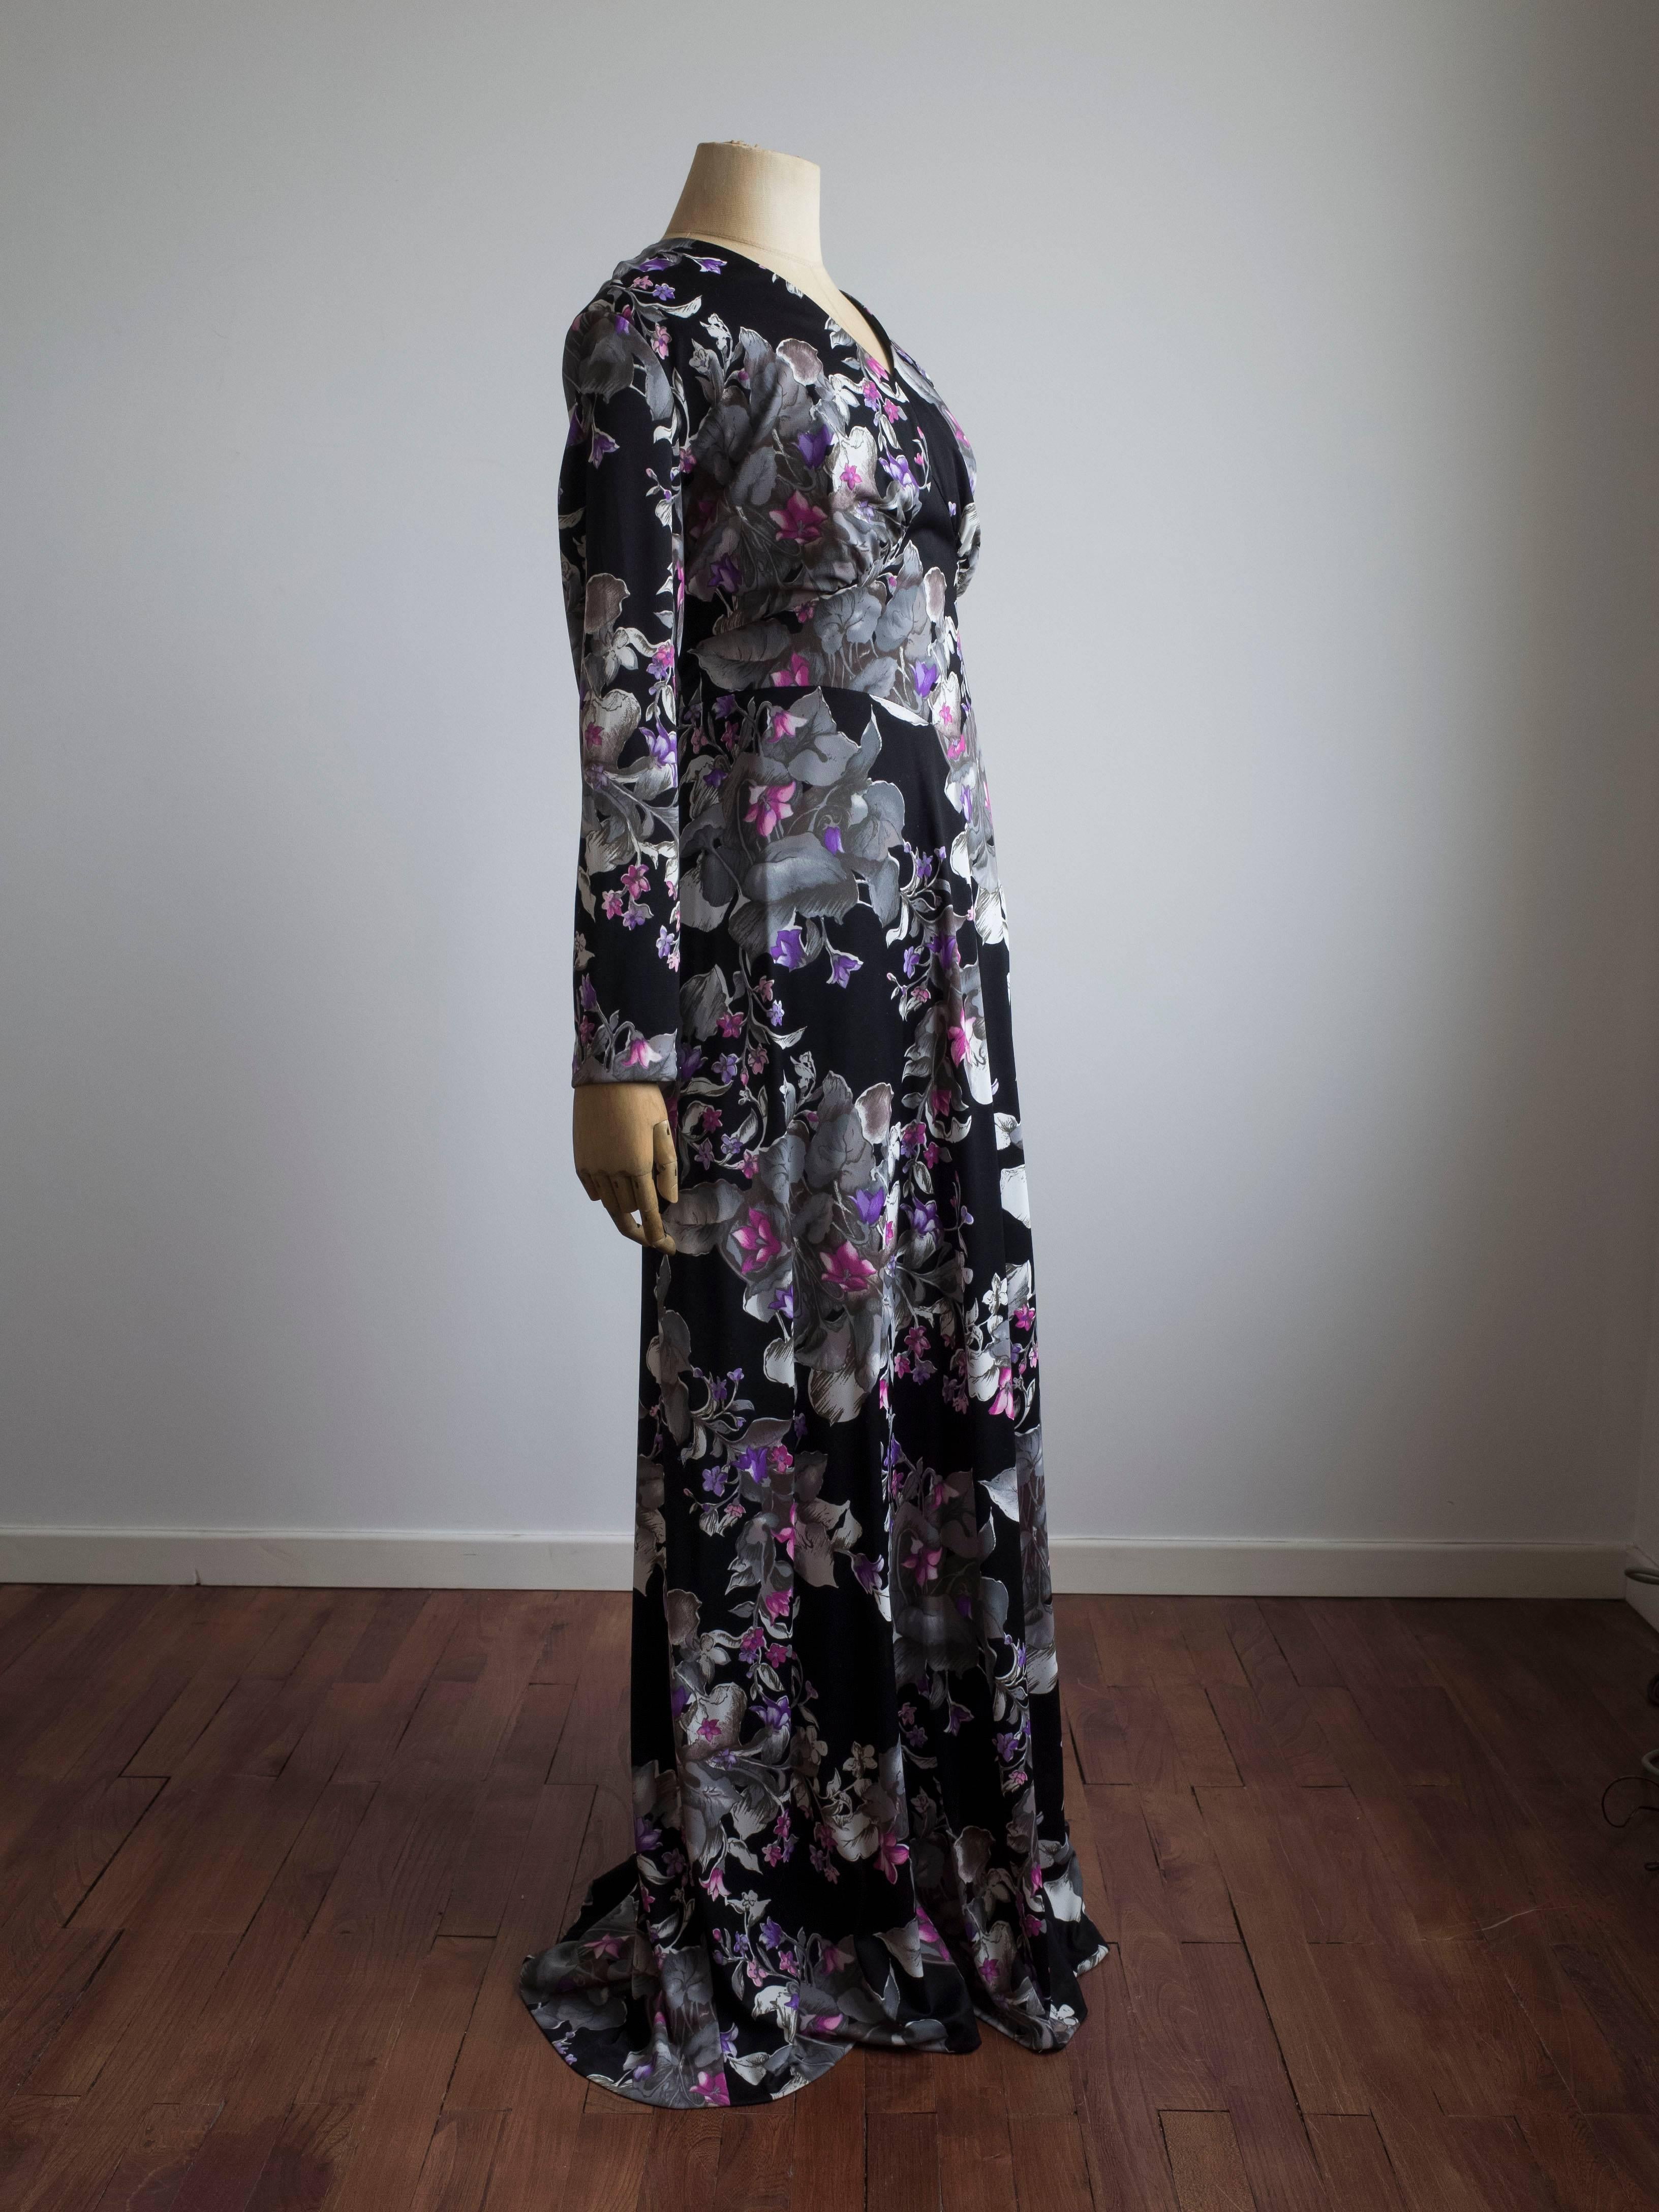 1960s Long sleeve gown by Maison Rigah, Amsterdam.
Never been worn - still has original tags.

All over black, pink and purple floral print. 
Features long ties to secure and accentuate the waist.
Full back zip. Fully lined.
Outer: 100%